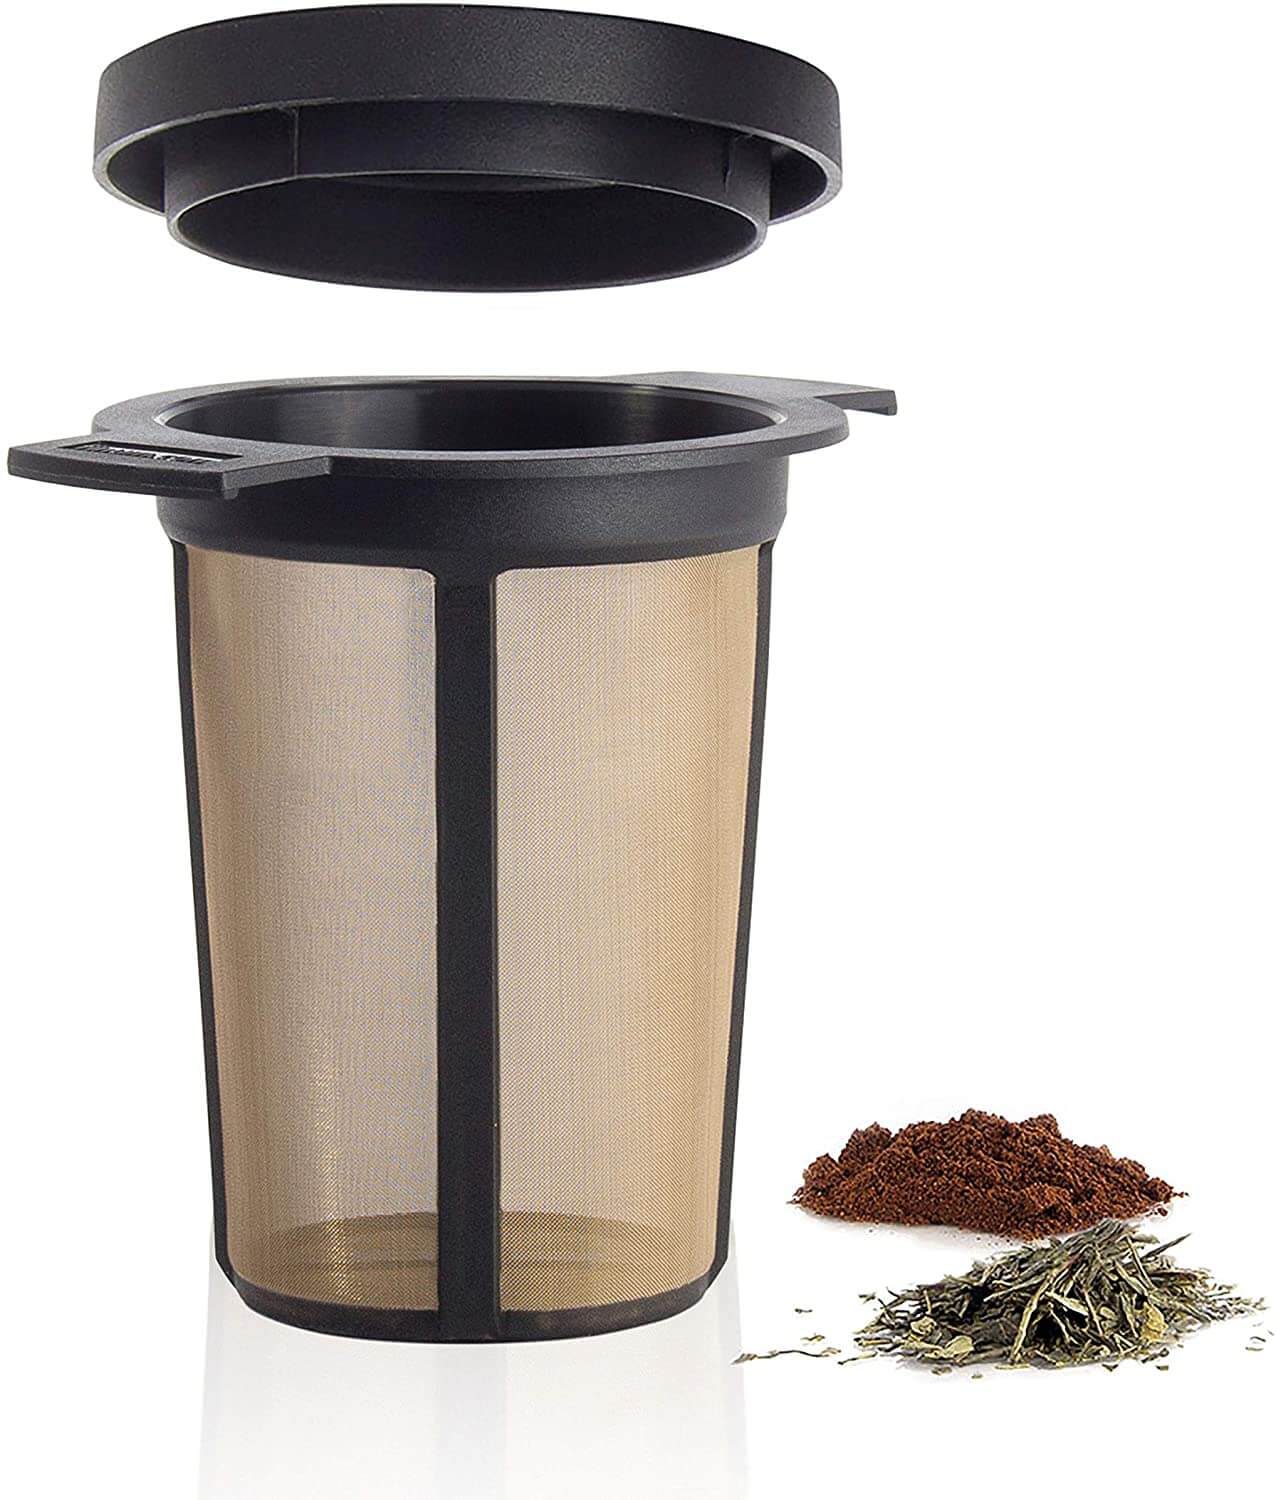 Finum Reusable Stainless Steel Coffee and Tea Infusing Mesh Brewing Basket